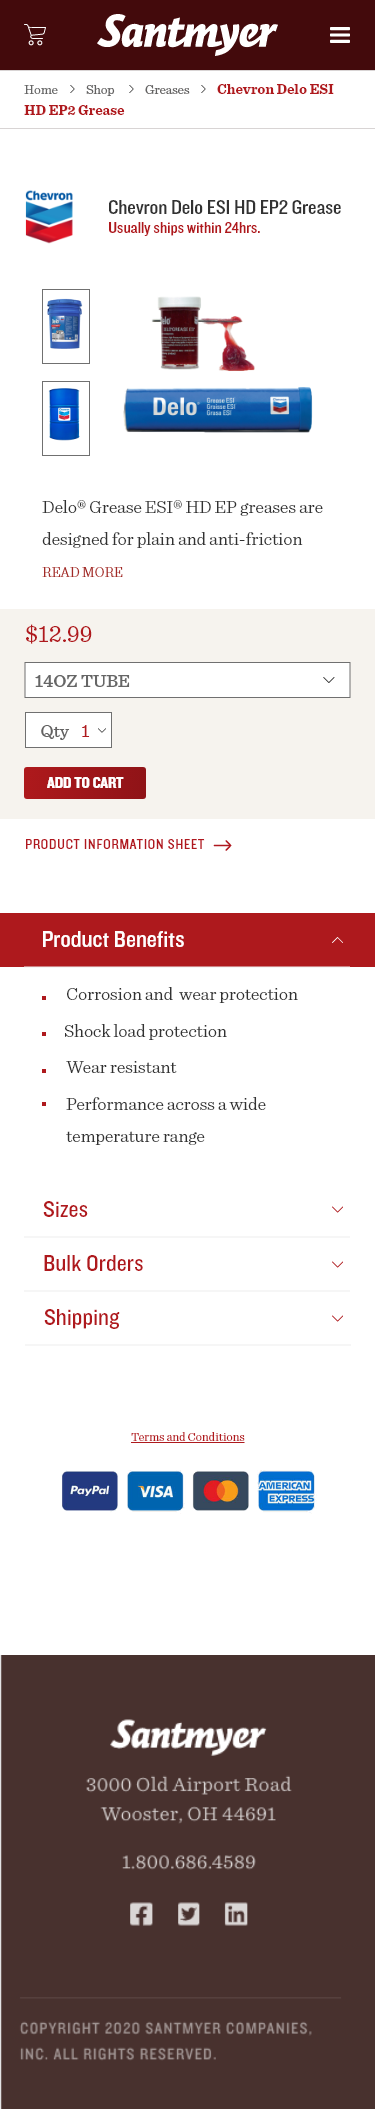 Product Details – 1.png